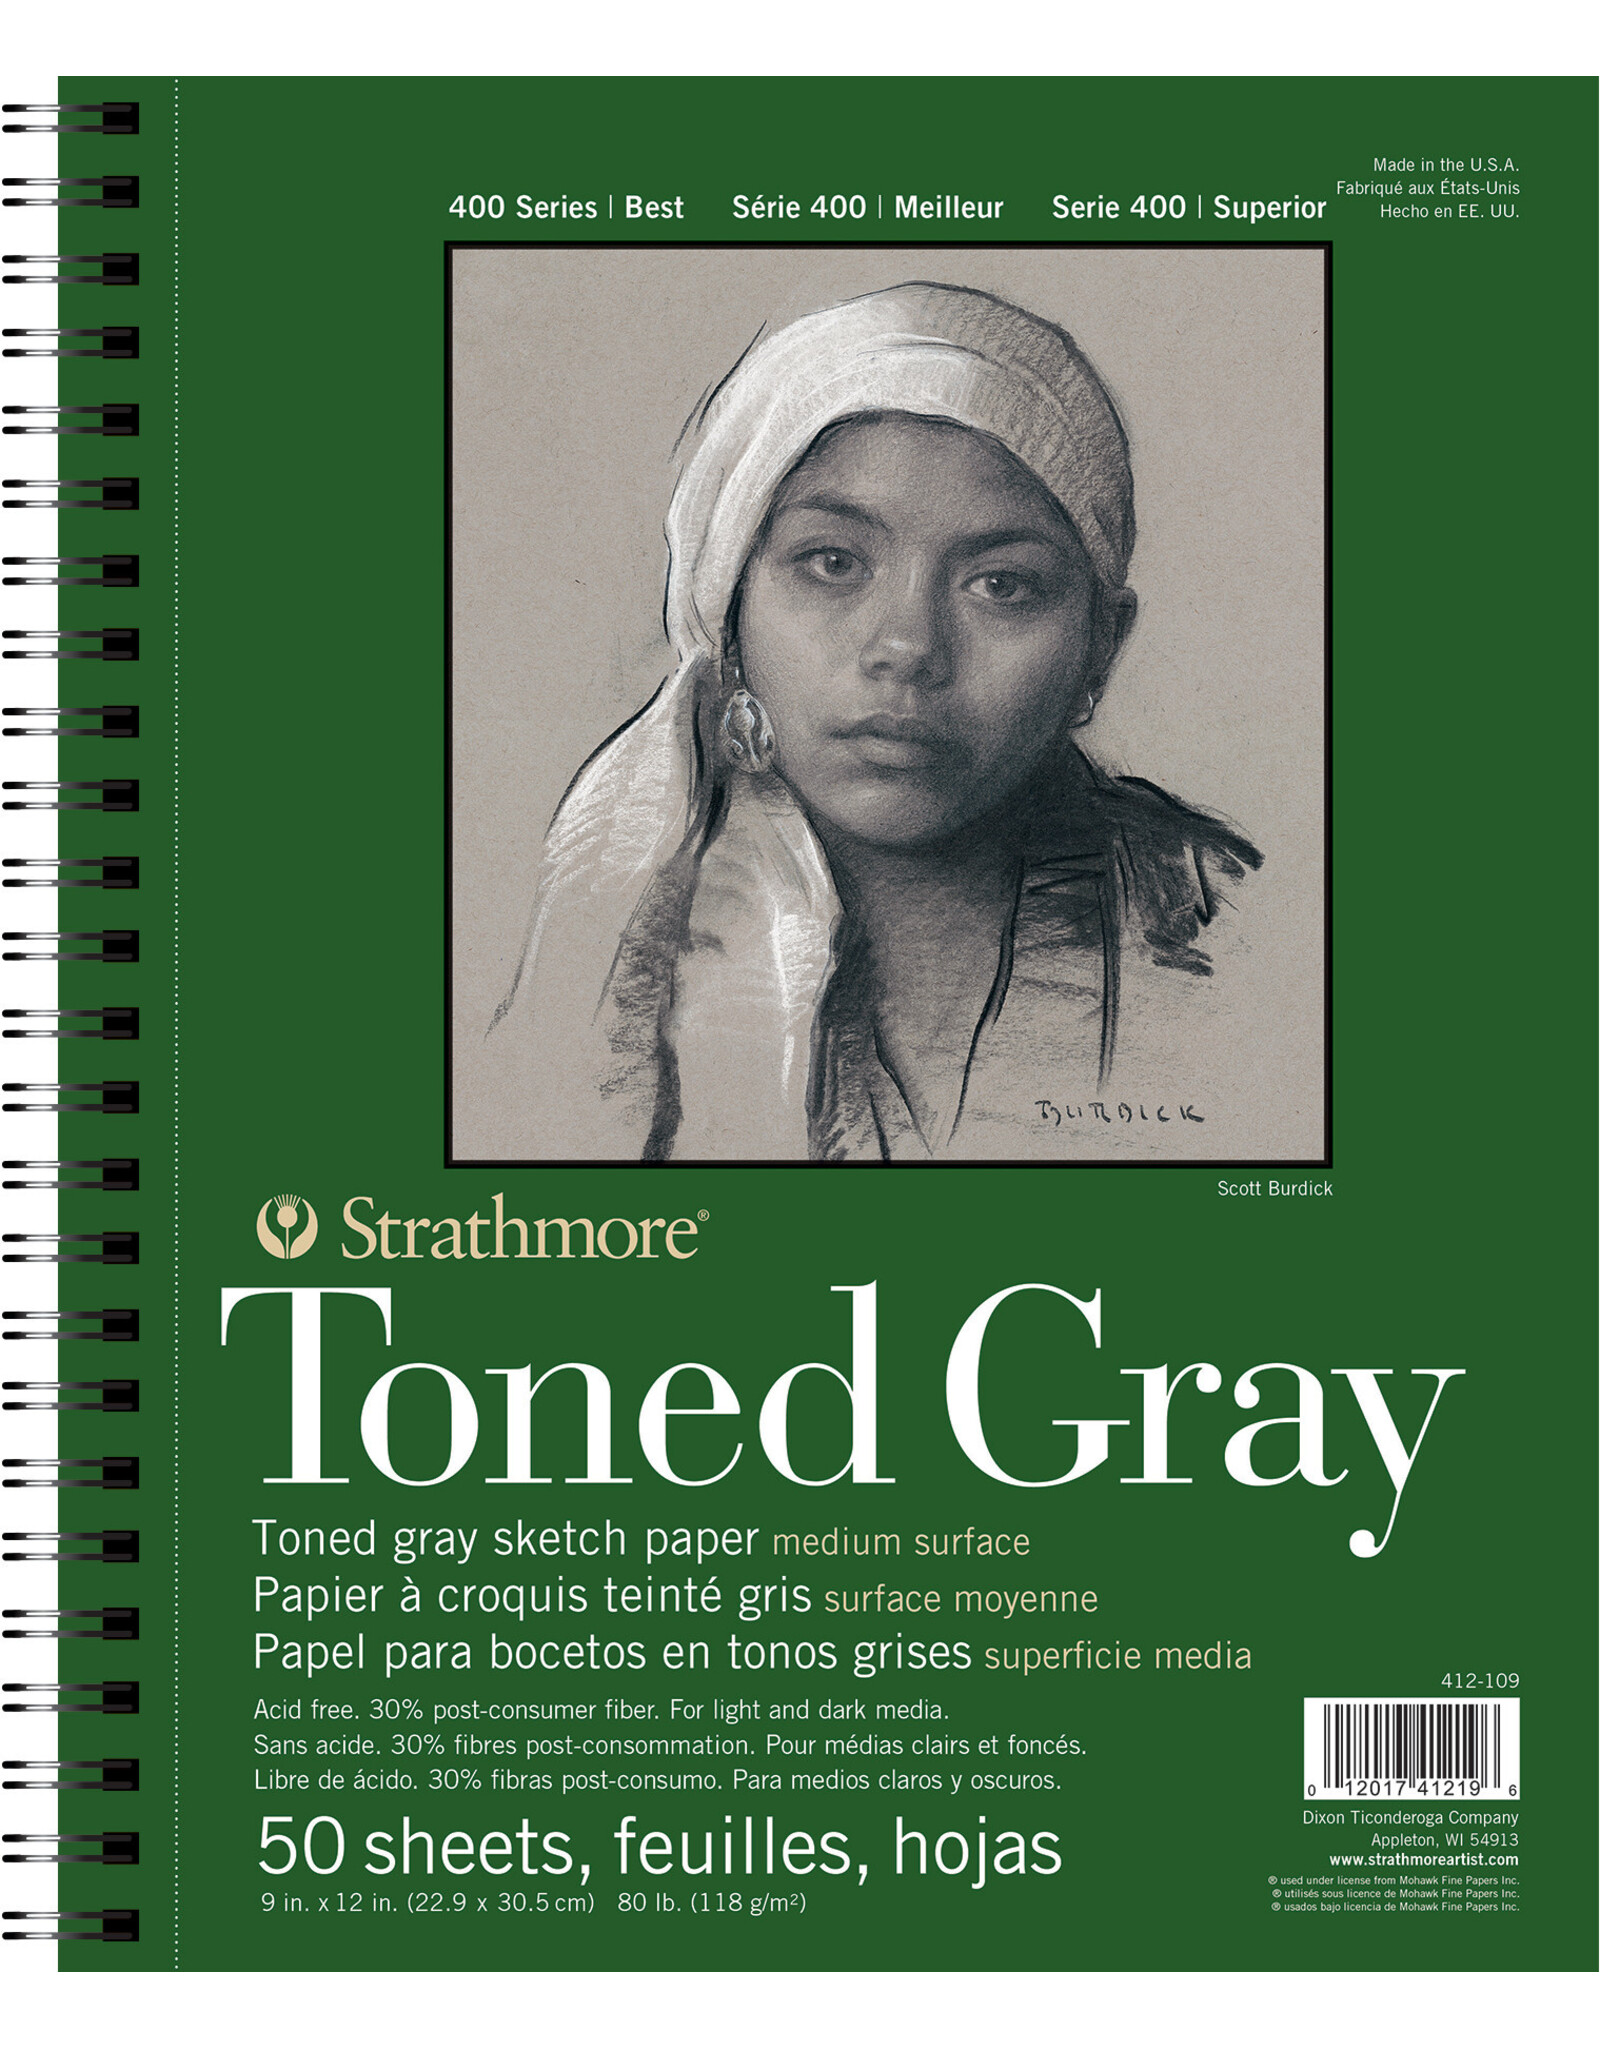 Strathmore Strathmore 400 Toned Gray Sketch Pad, 50 Sheets, 9” x 12”